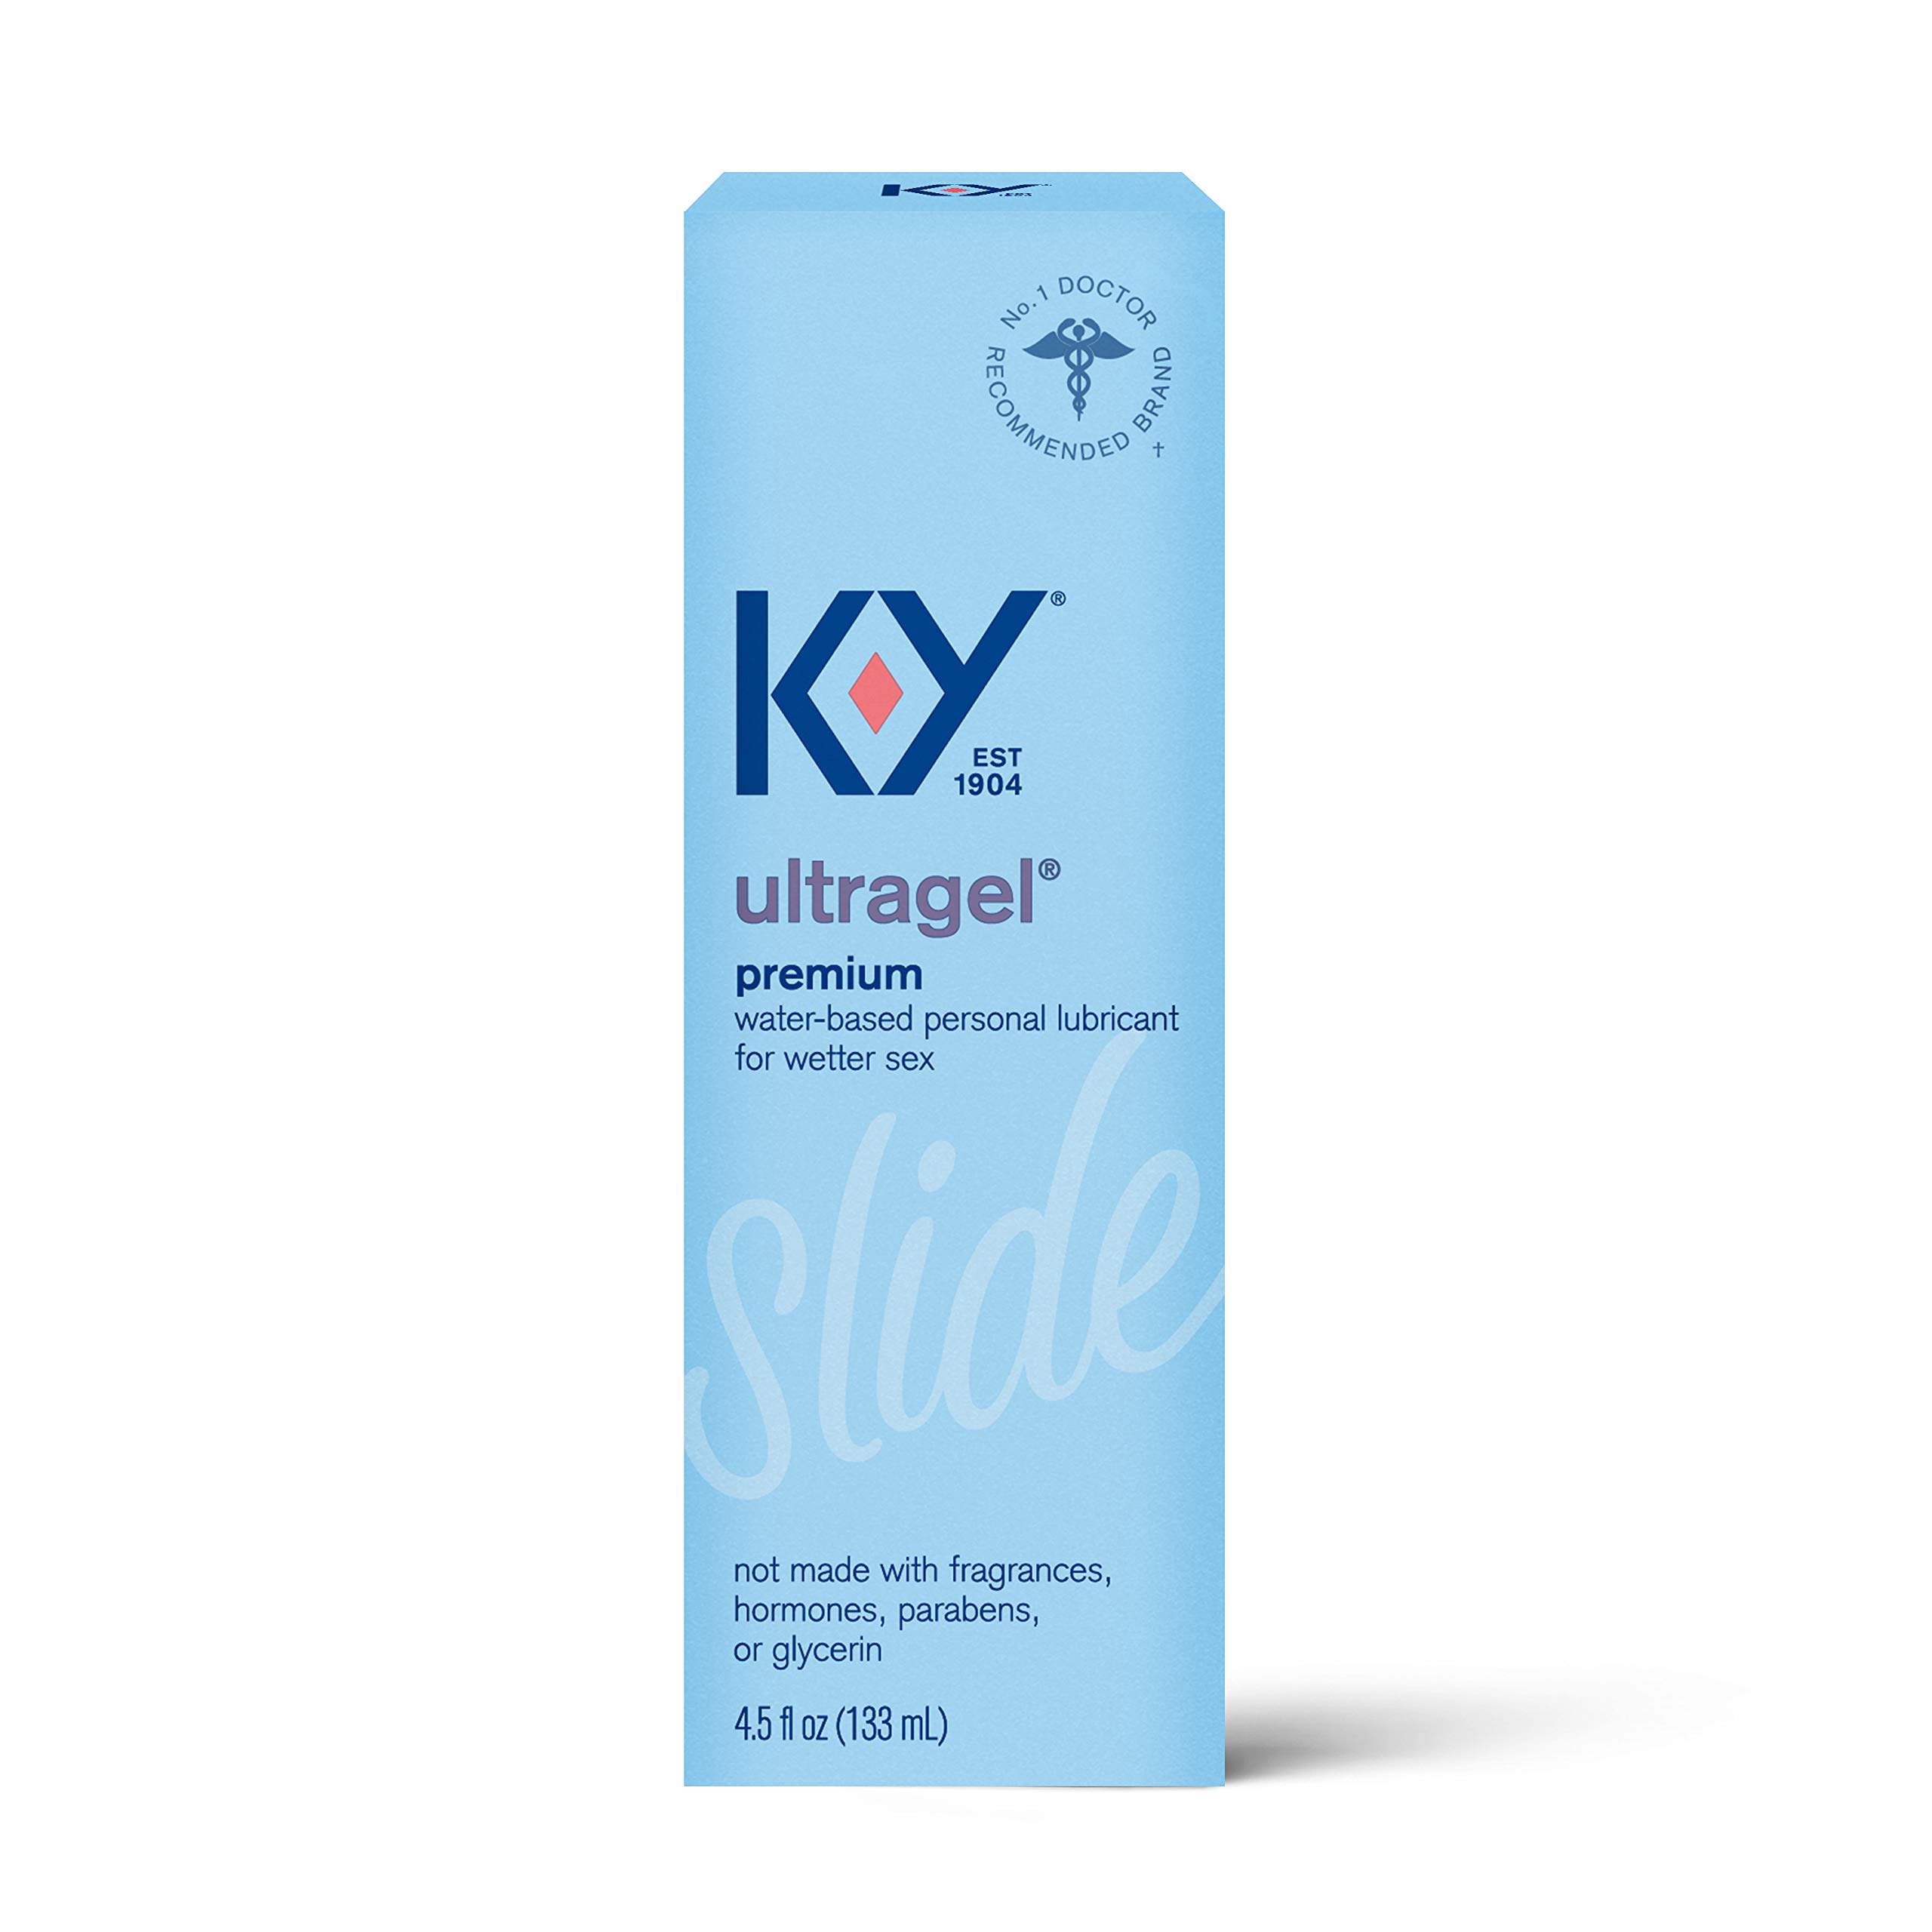 K-Y Ultragel Lube, Personal Lubricant, Water-Based Formula, Safe to Use with Silicone Toys, for Men, Women and Couples, 4.5 FL OZ